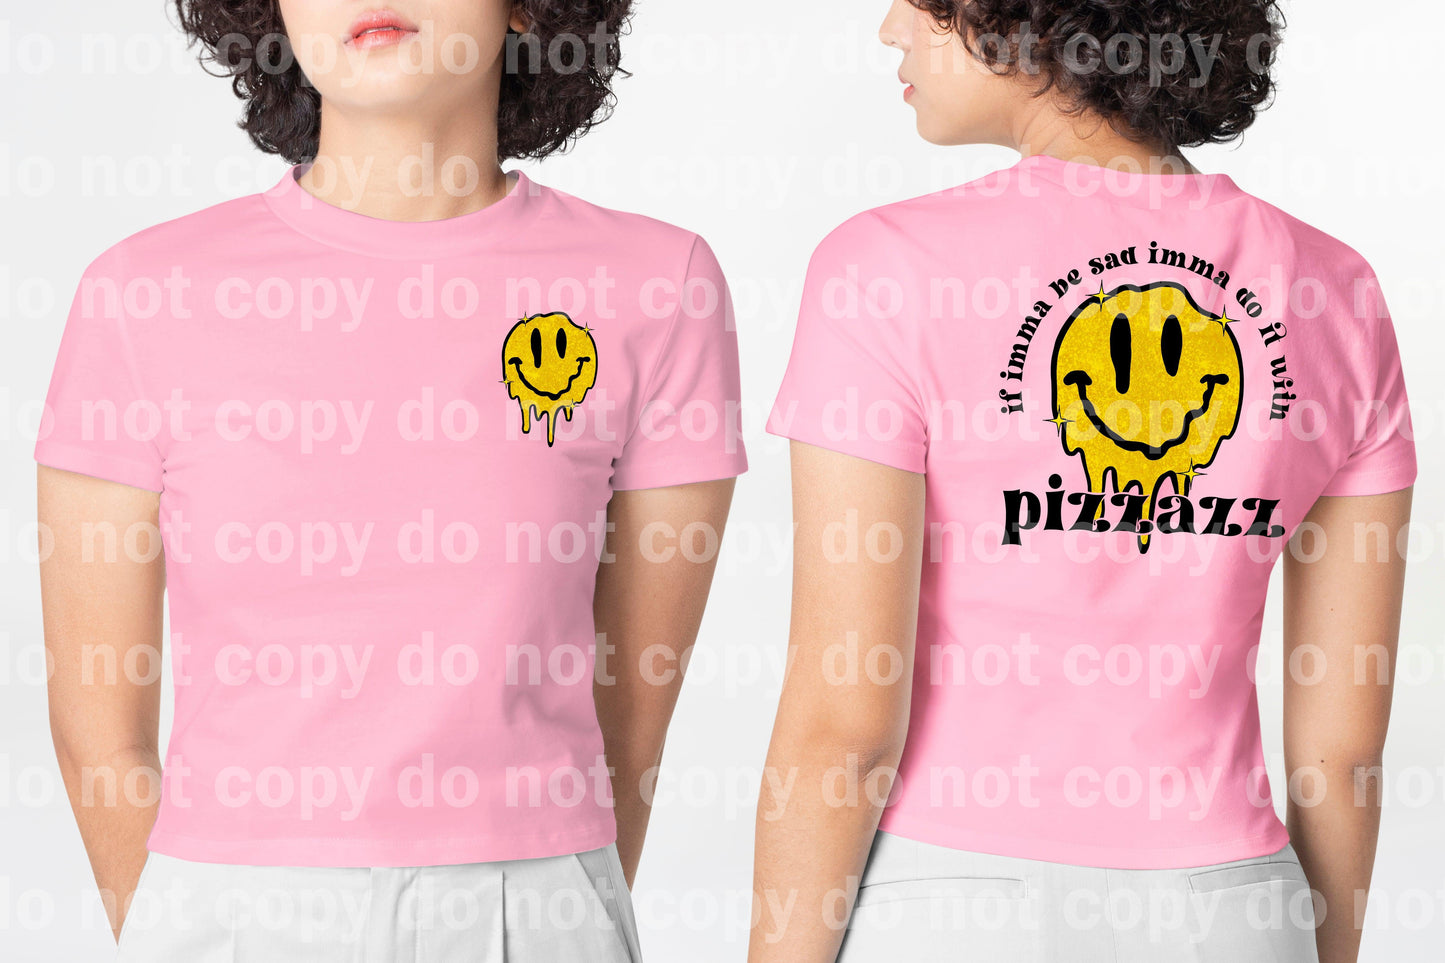 IF Imma Be Sad Imma Do n With Pizzazz Full Color/One Color Dream Print or Sublimation Print